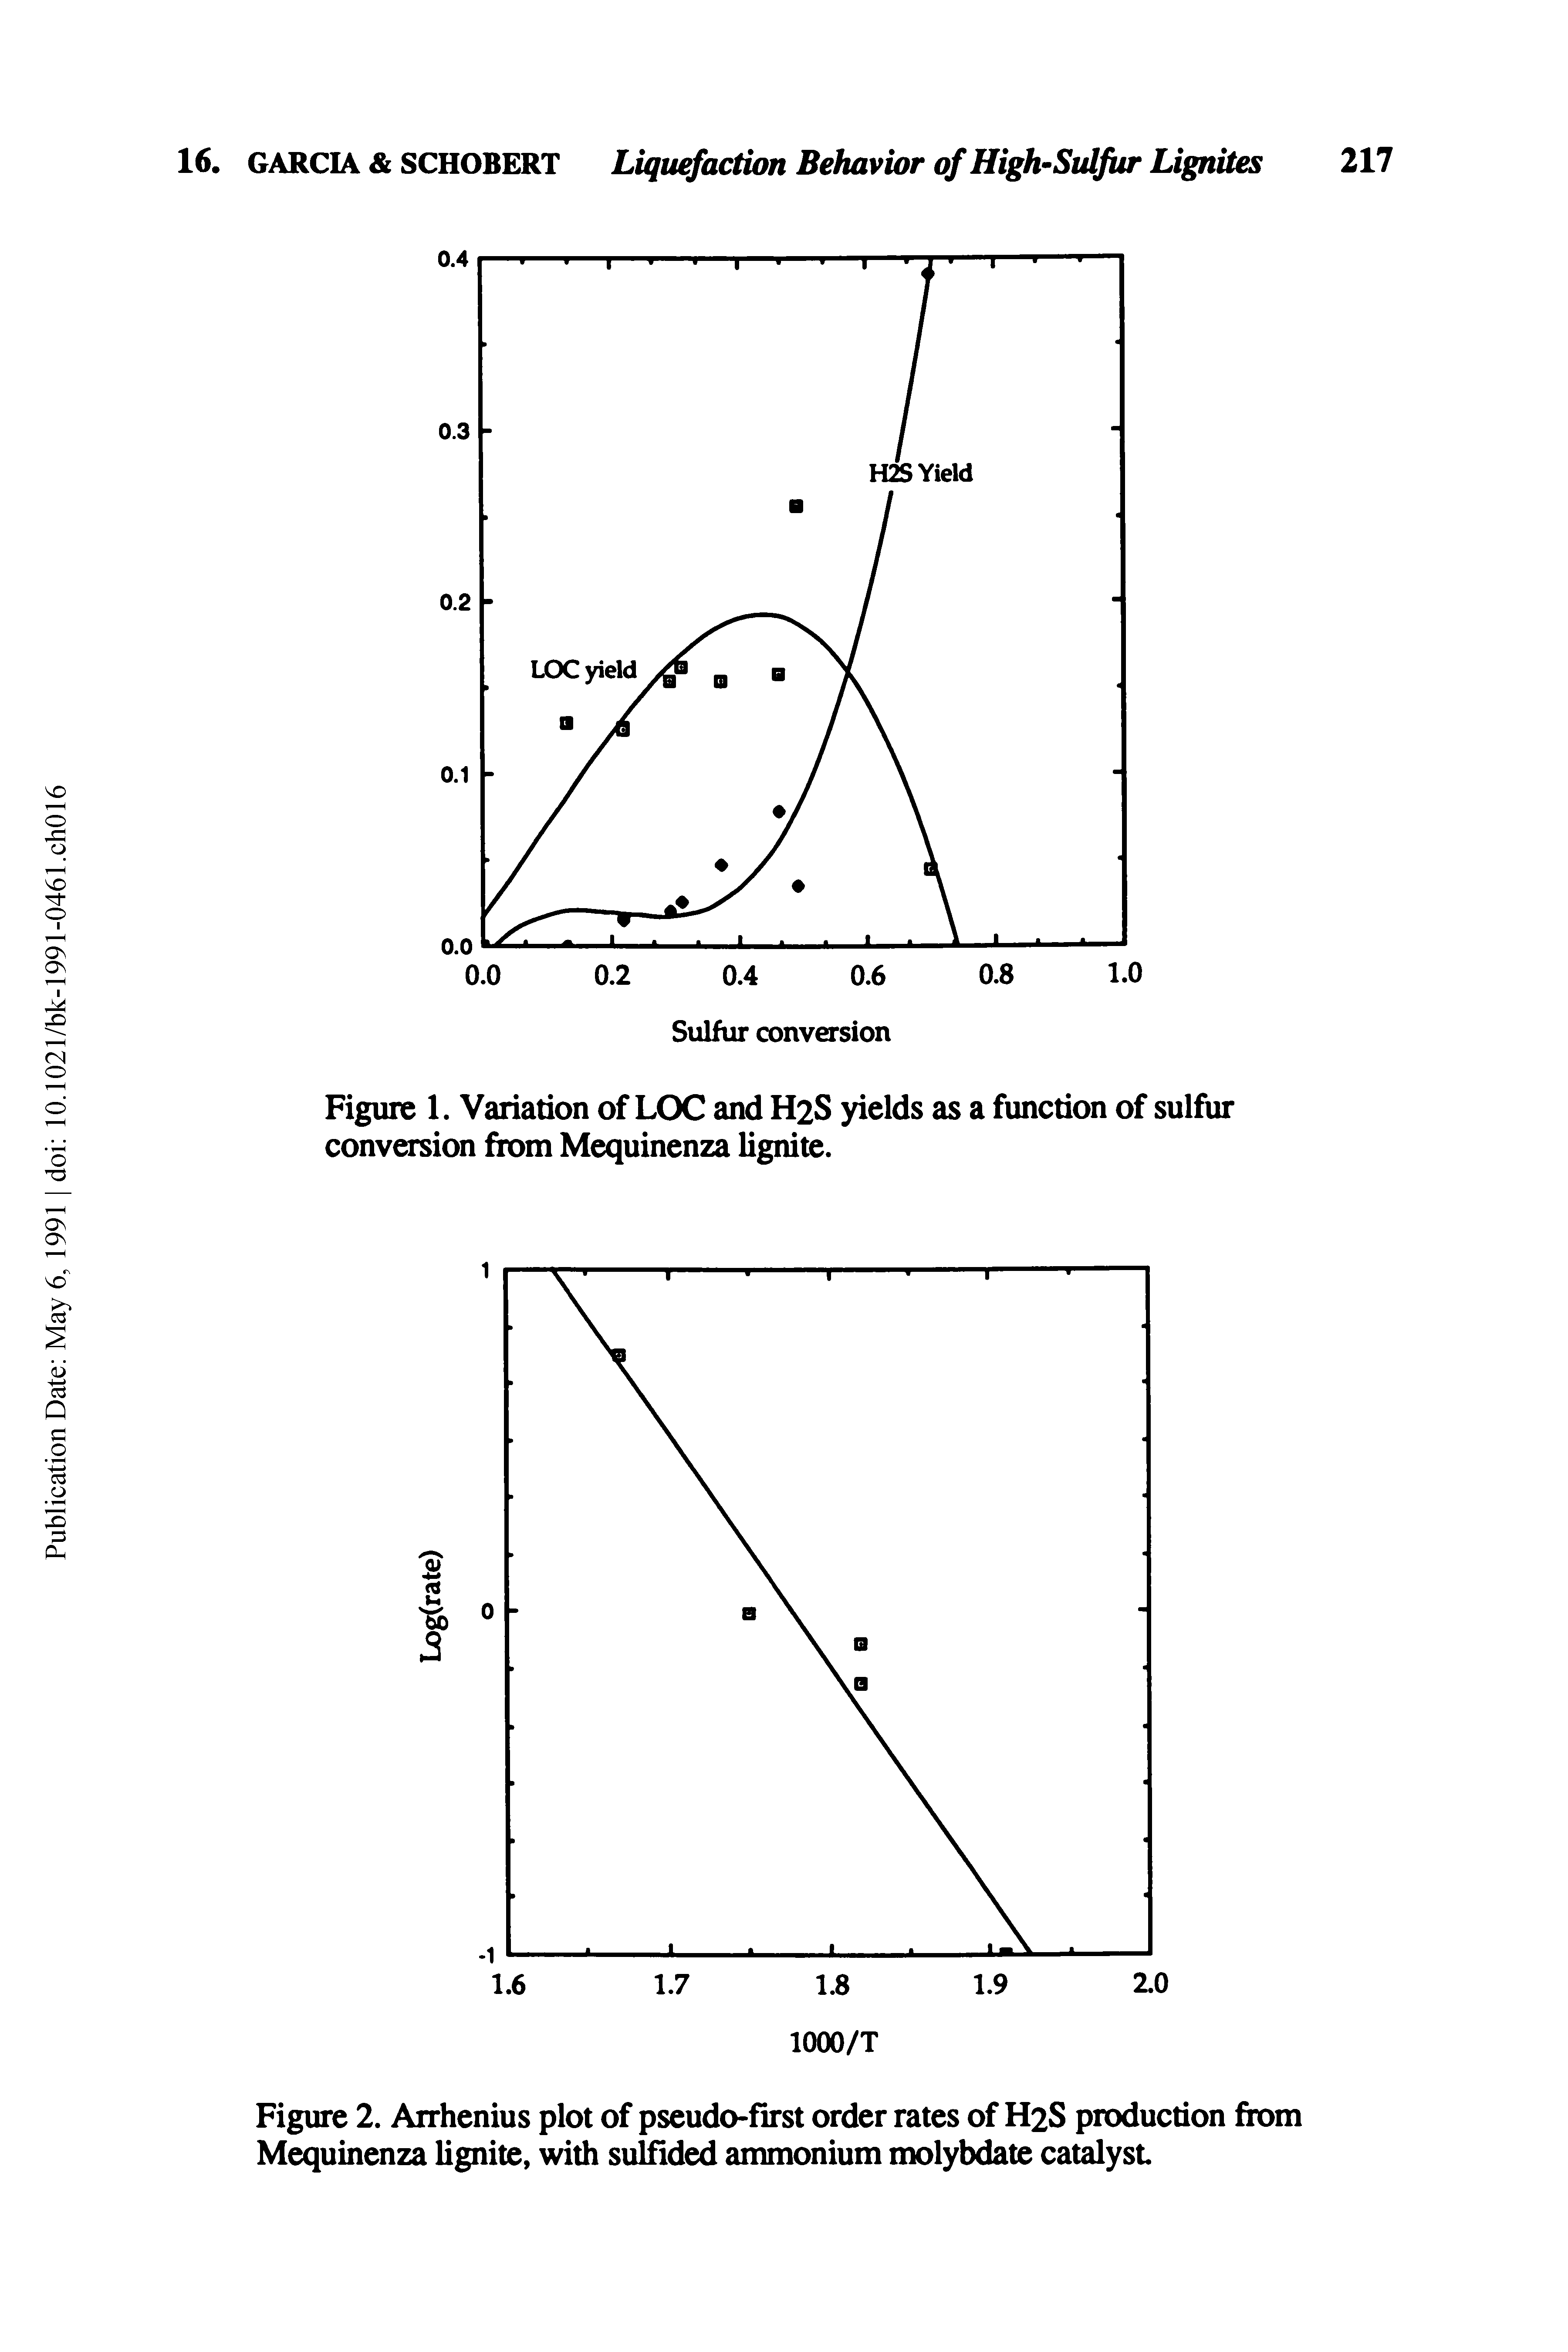 Figure 1. Variation of LOG and H2S yields as a function of sulfur conversion from Mequinenza lignite.